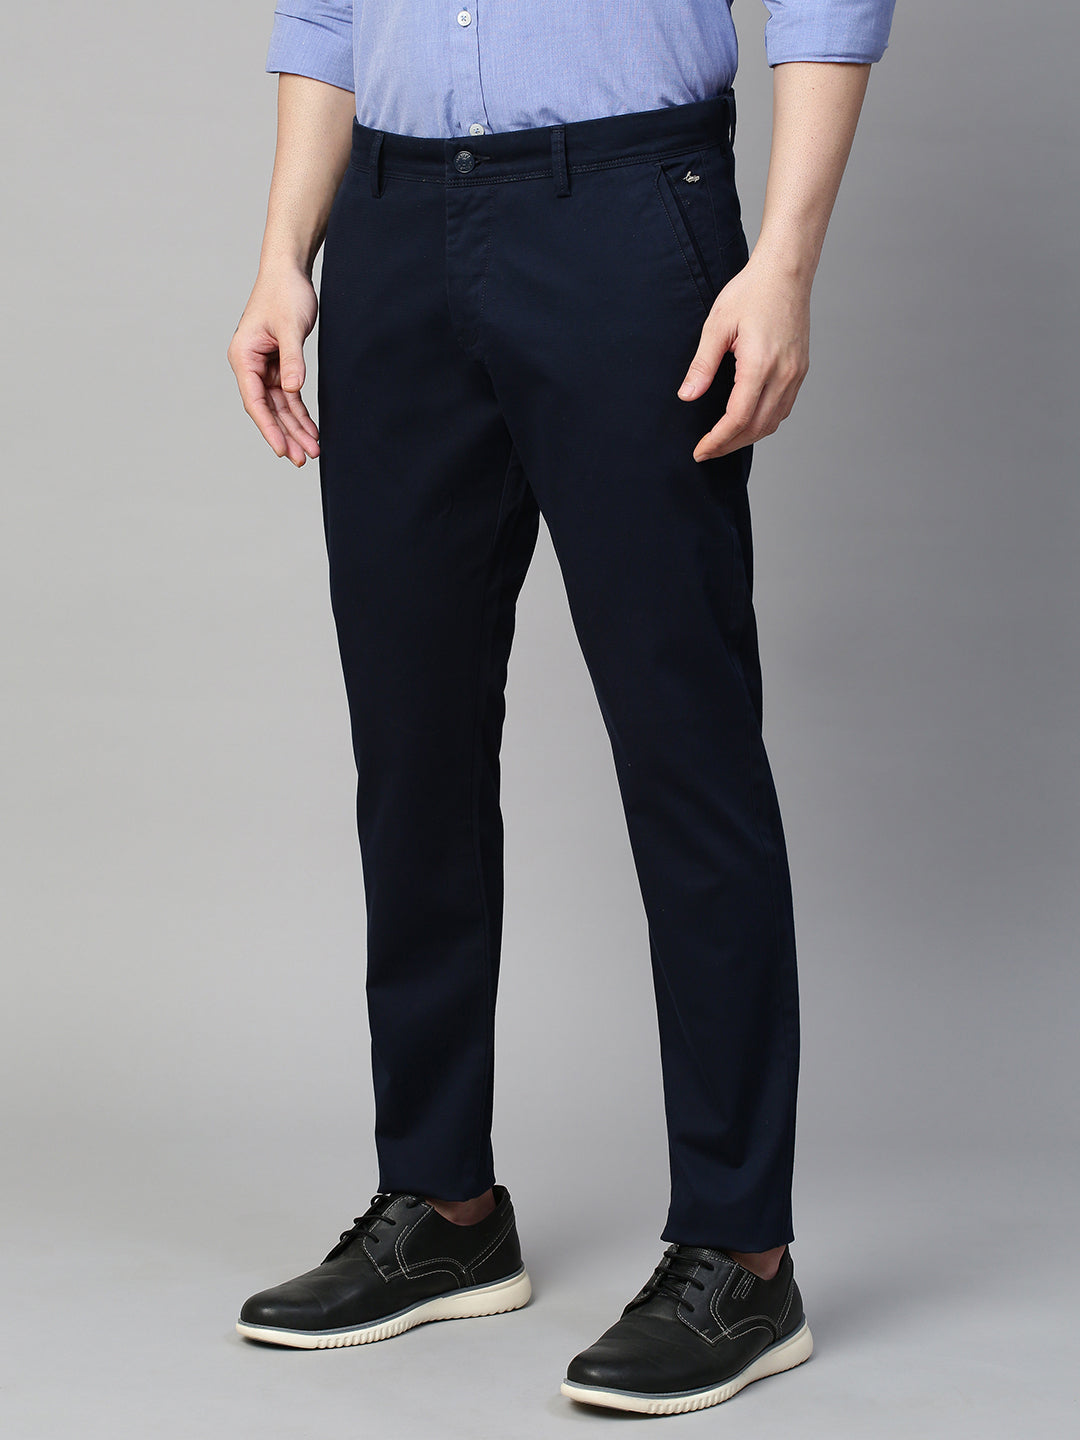 Genips Men's Navy Cotton Stretch Caribbean Slim Fit Solid Trousers